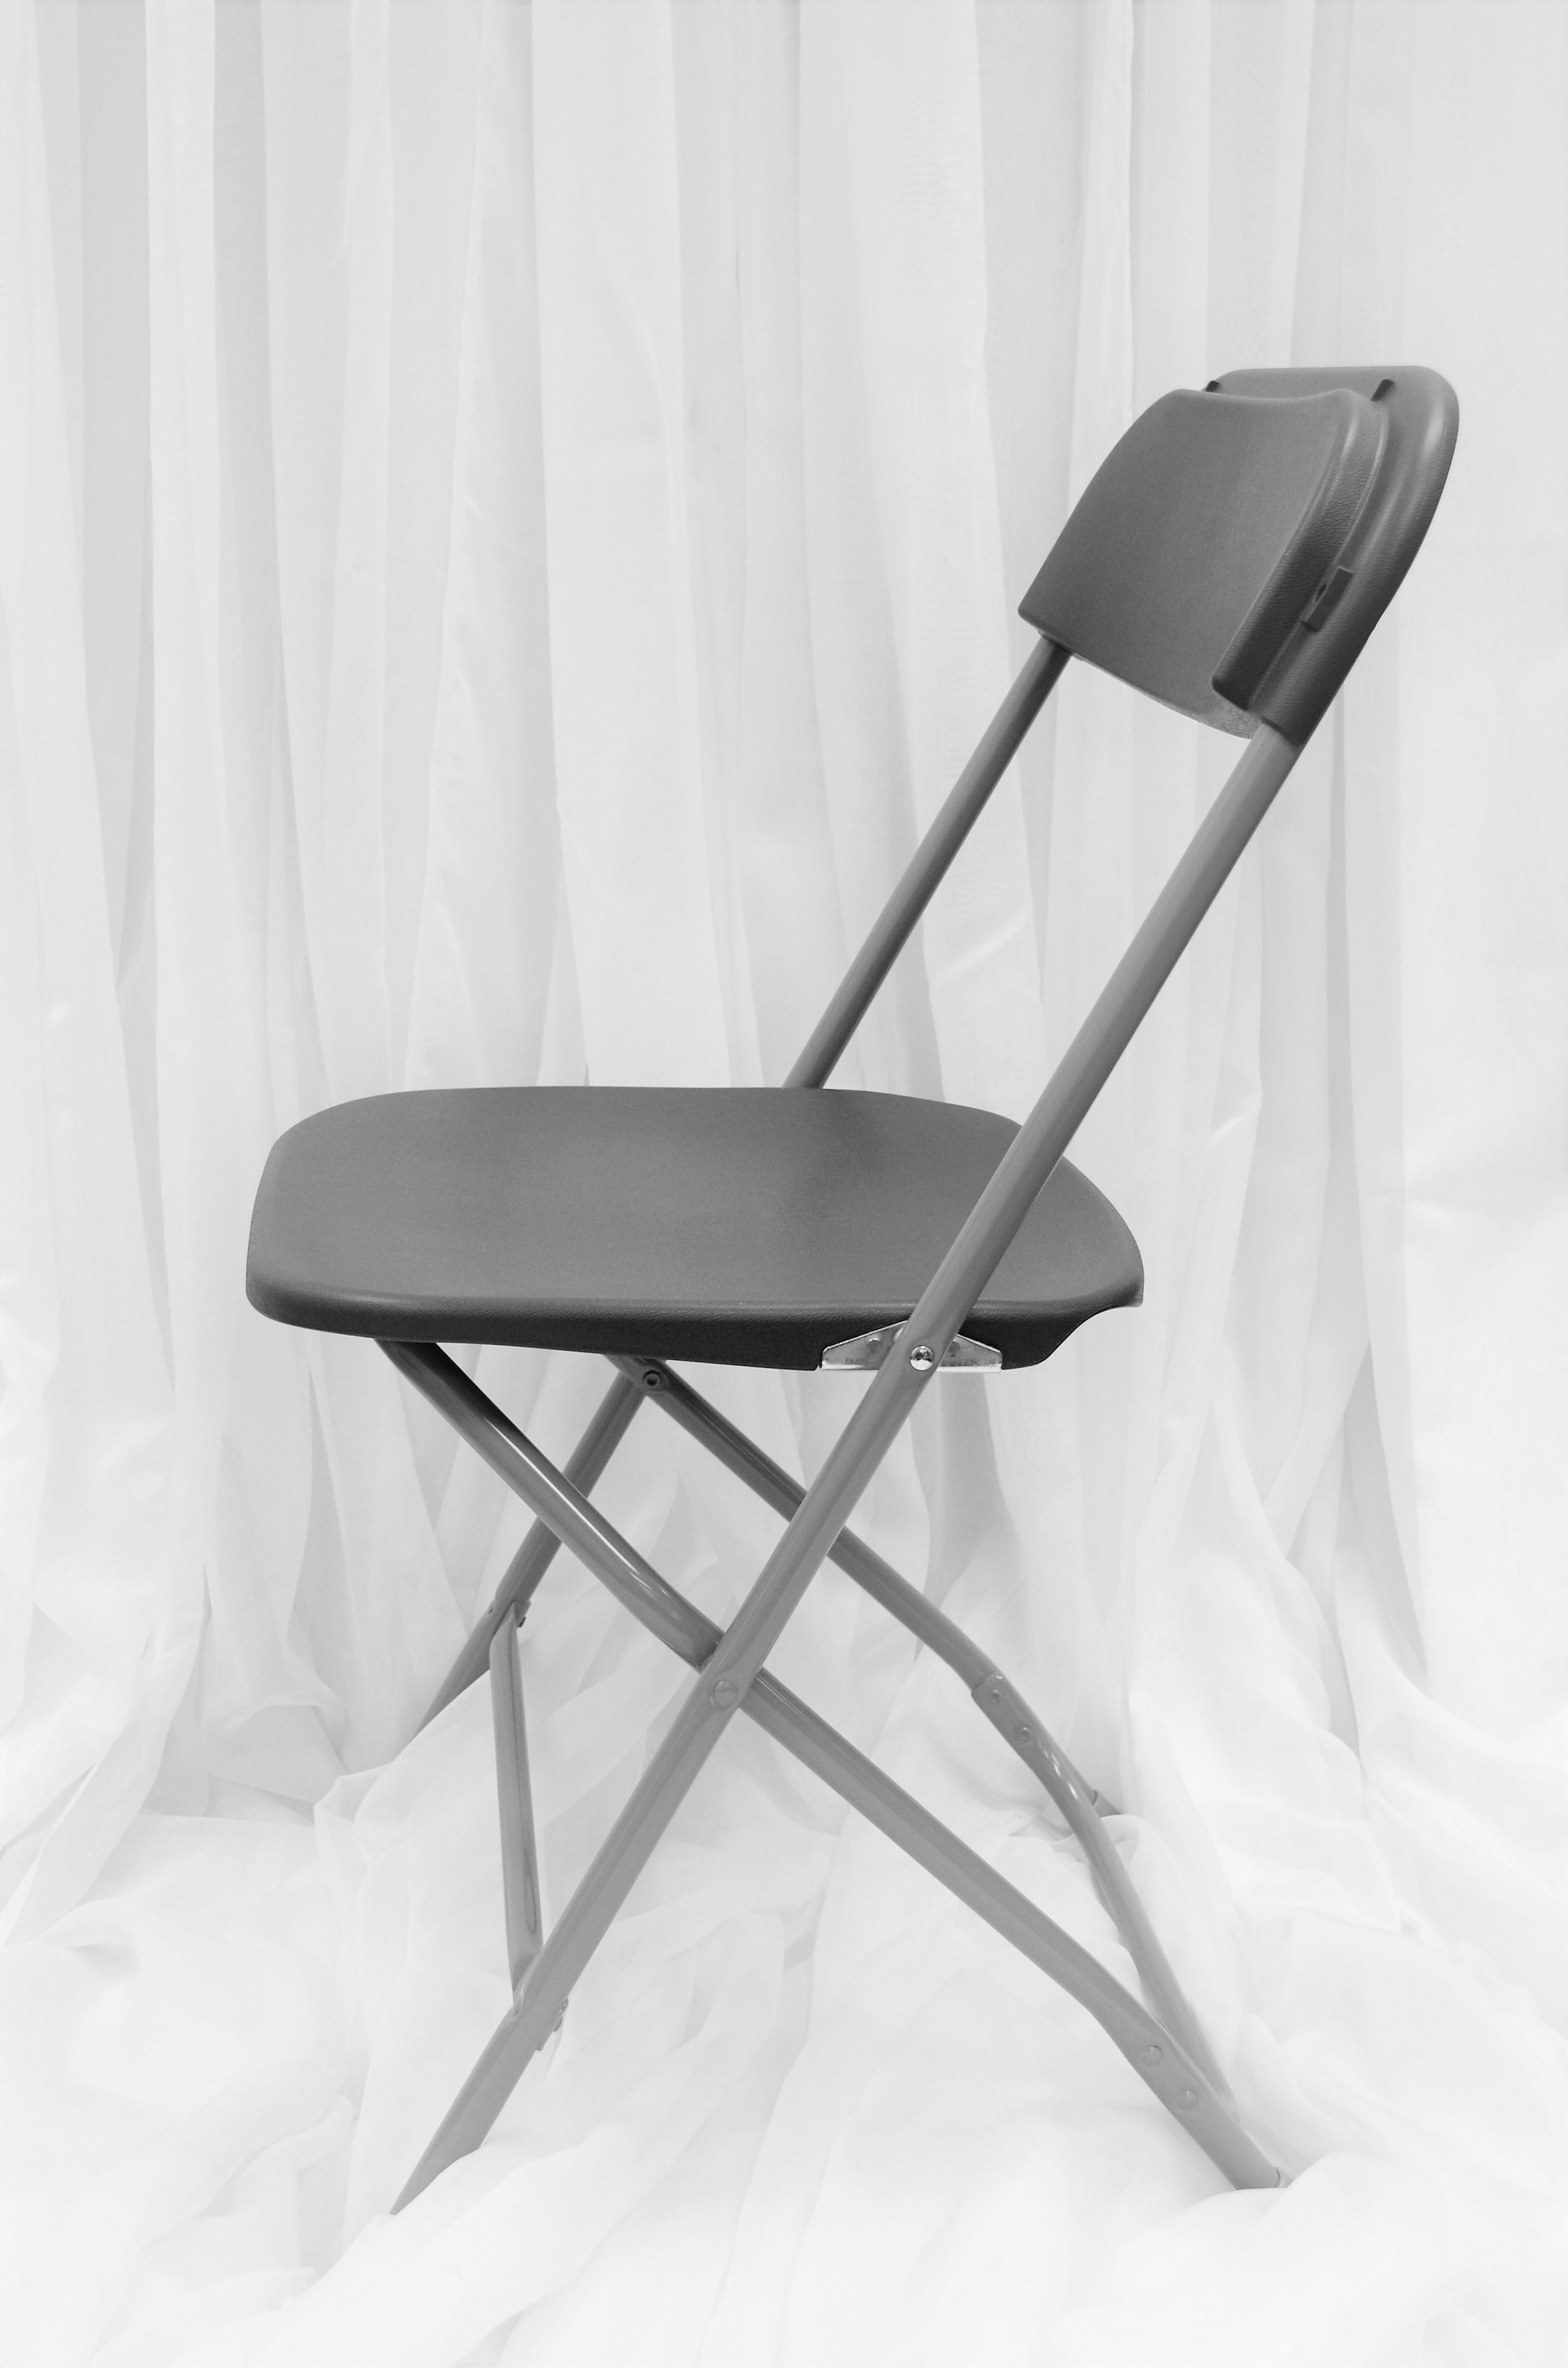 FOLDING PLASTIC - GREY CHAIR (Indoor Use Only)